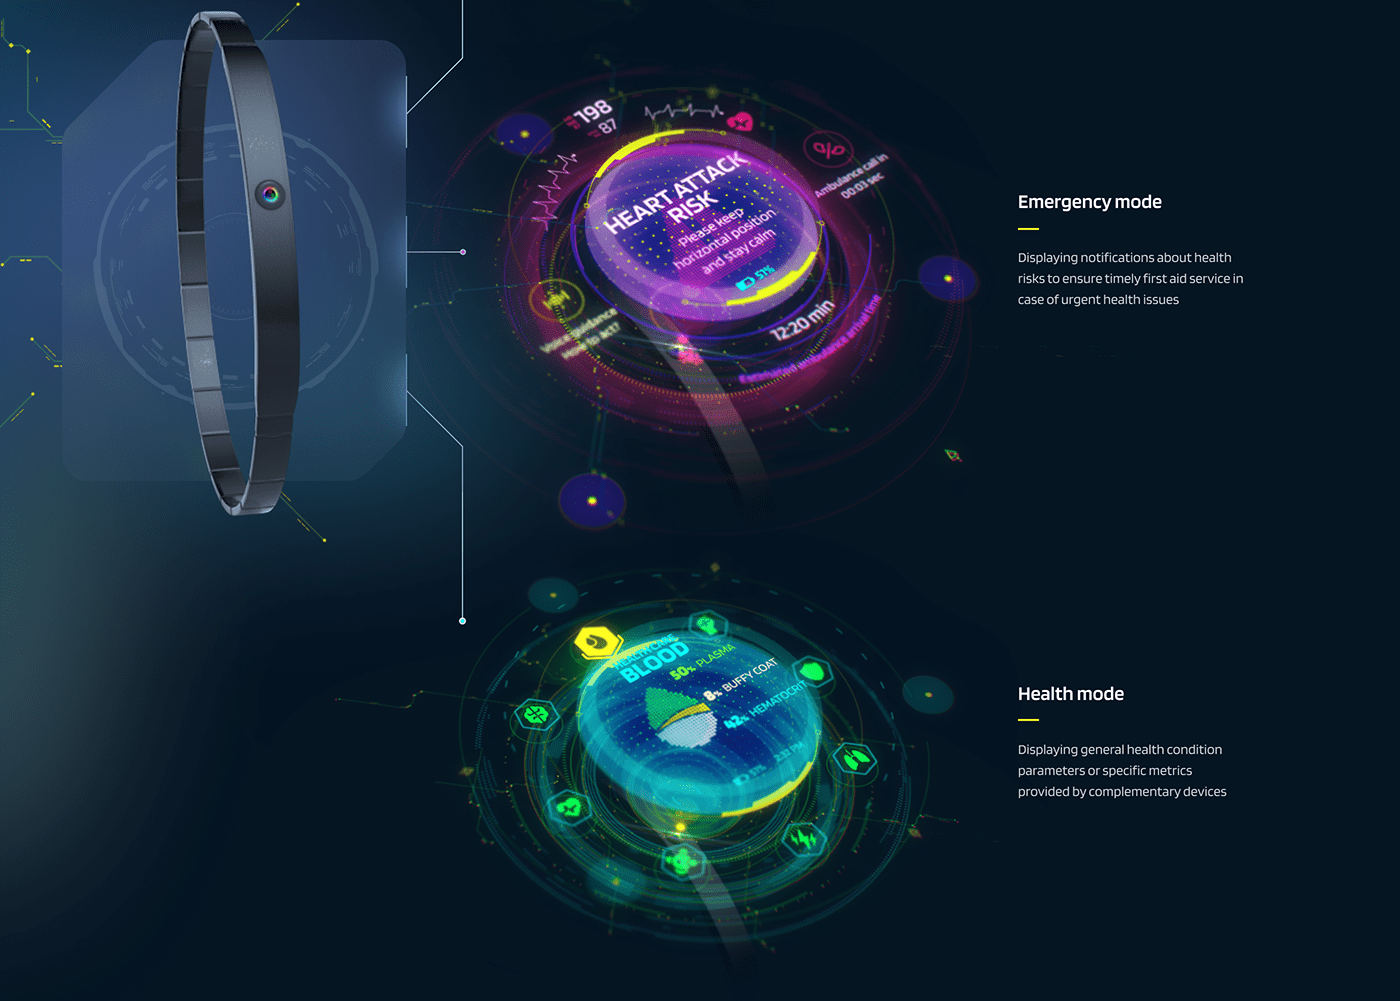 Cyberpunk design for healthcare Internet of Things IoT medical wearables personal device POC preventive care UI ux